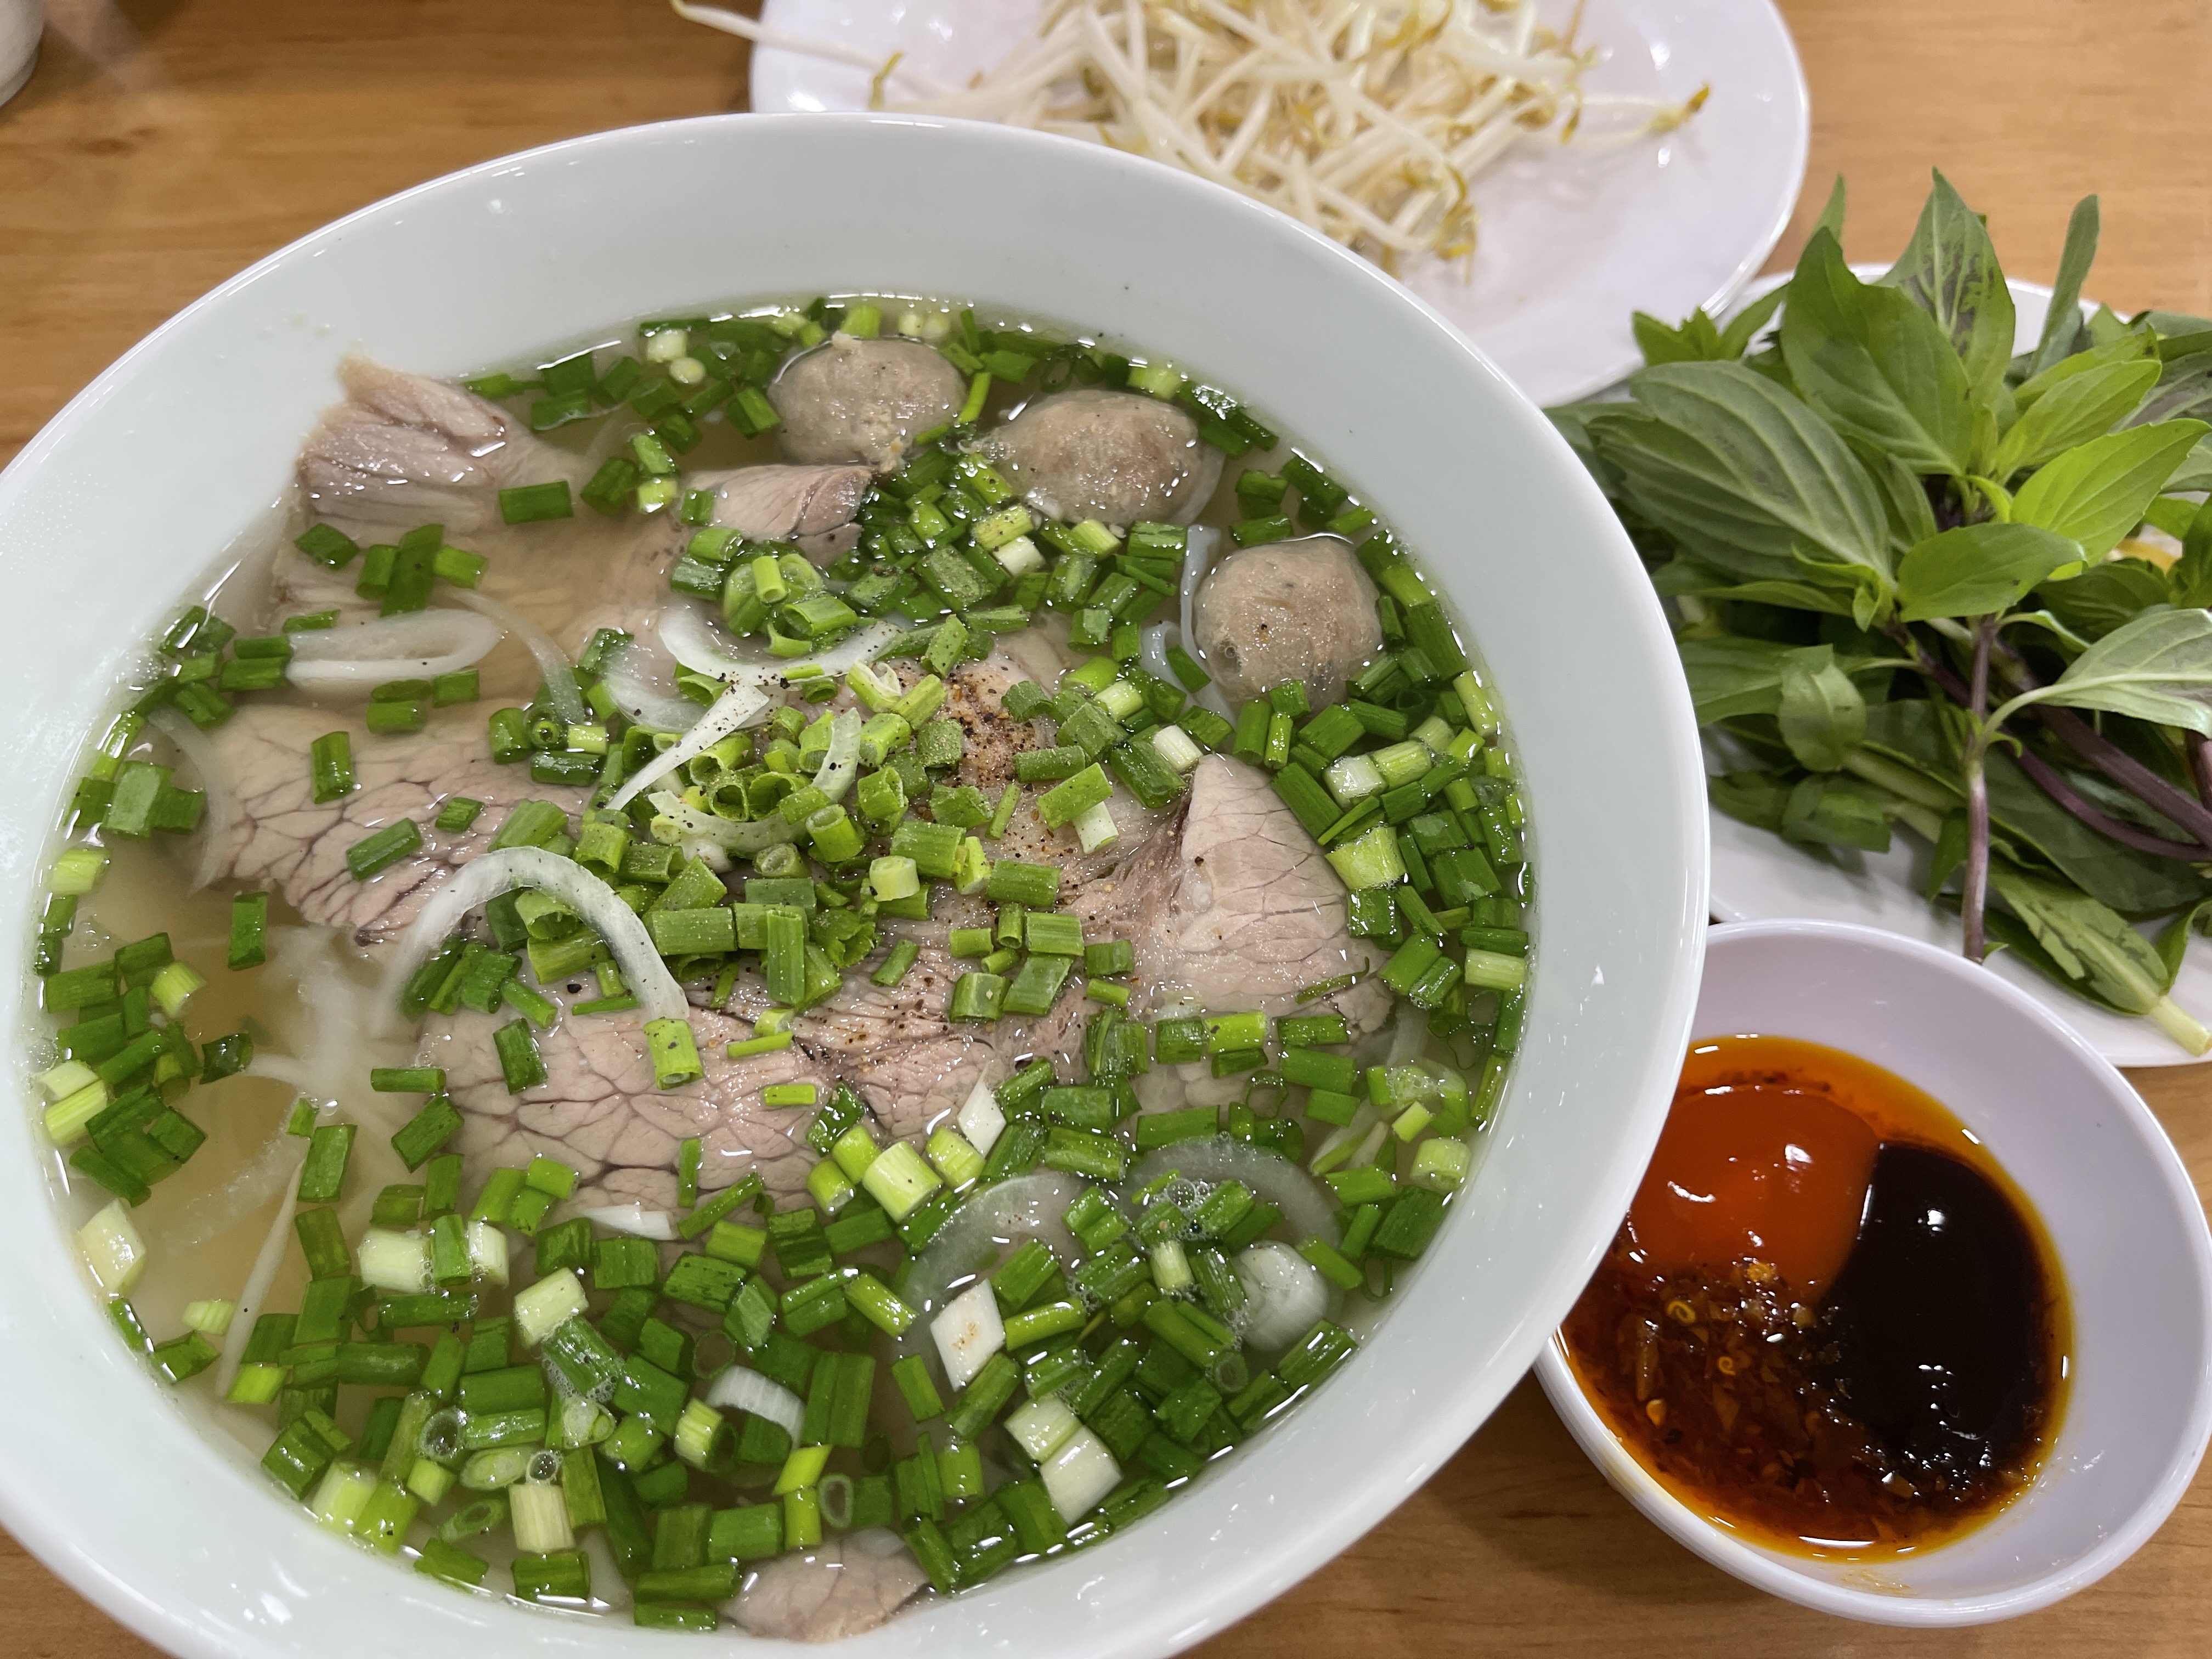 ‘Vietnam has many famous dishes, not only pho’